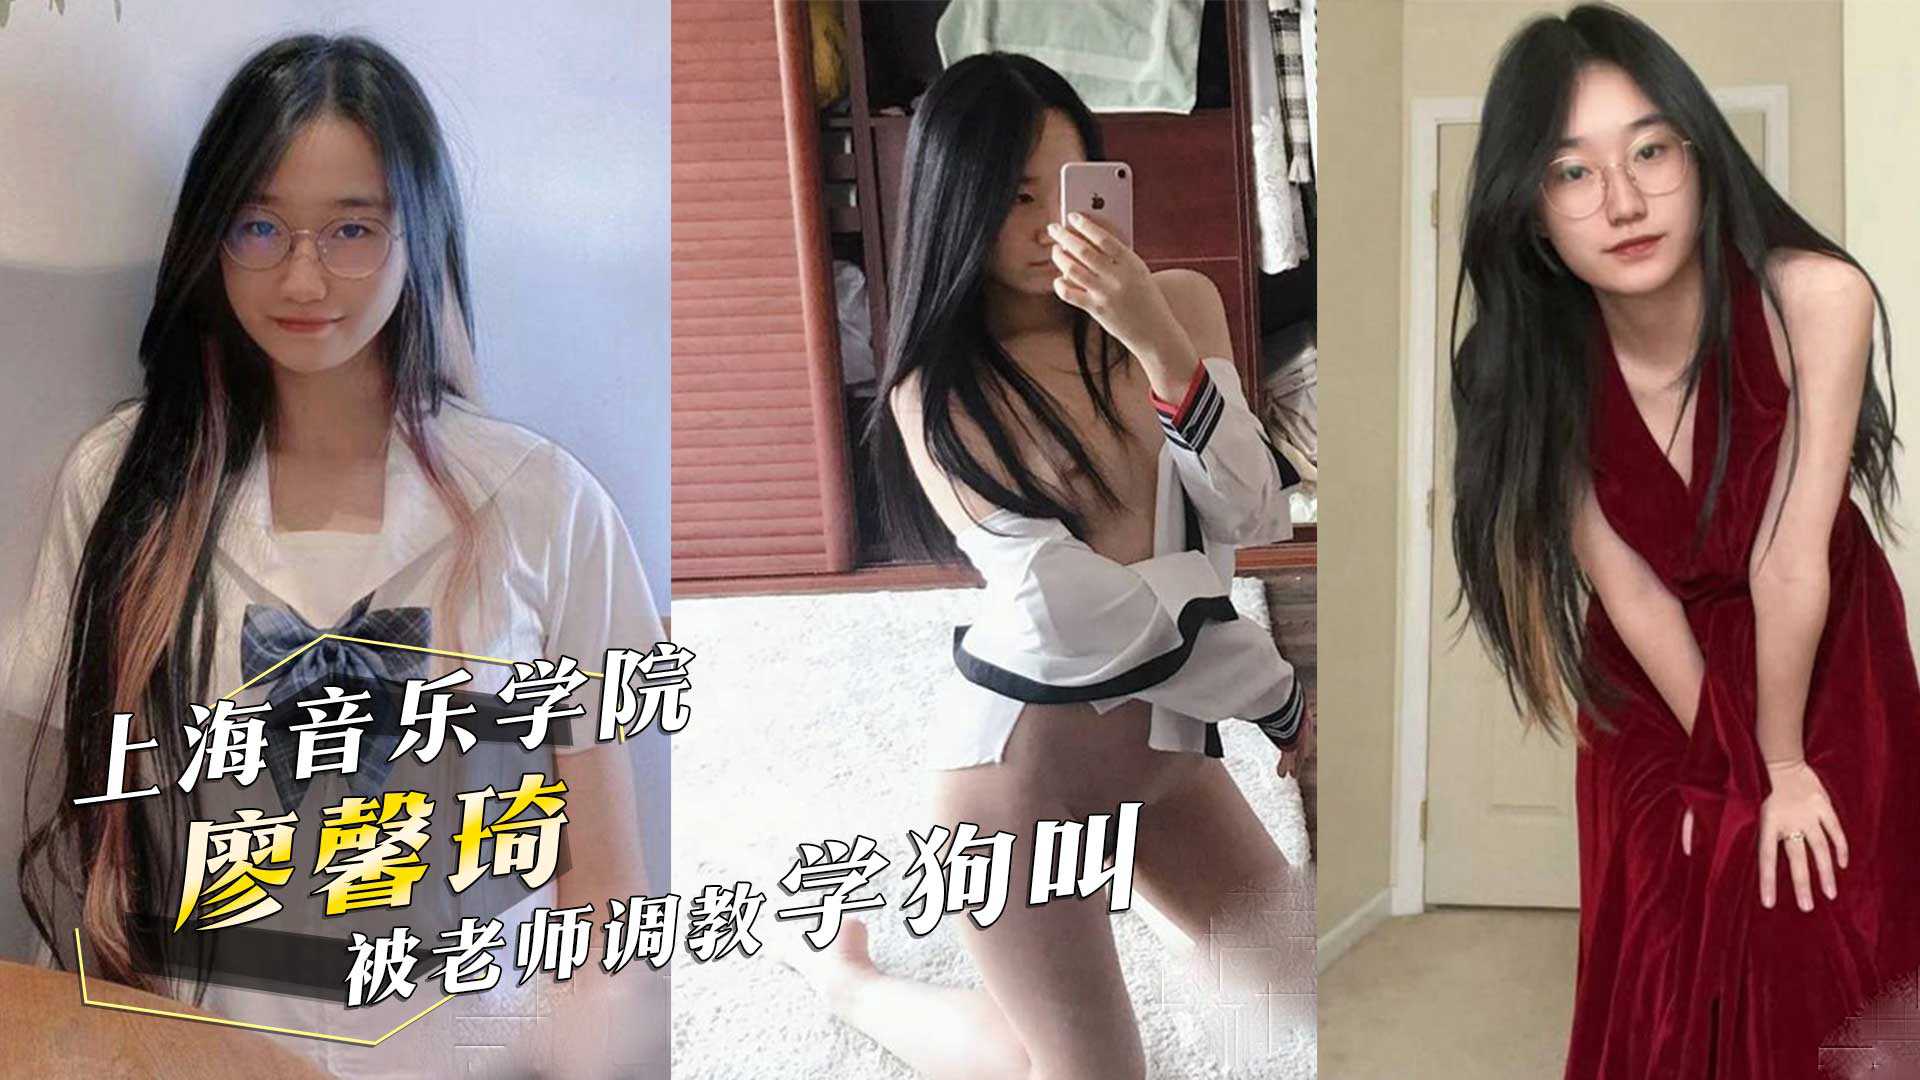 Shanghai Music Academy piano department 'Leo Qi' was named by the teacher for teaching dogs, with underwear dogs climbing masturbation!